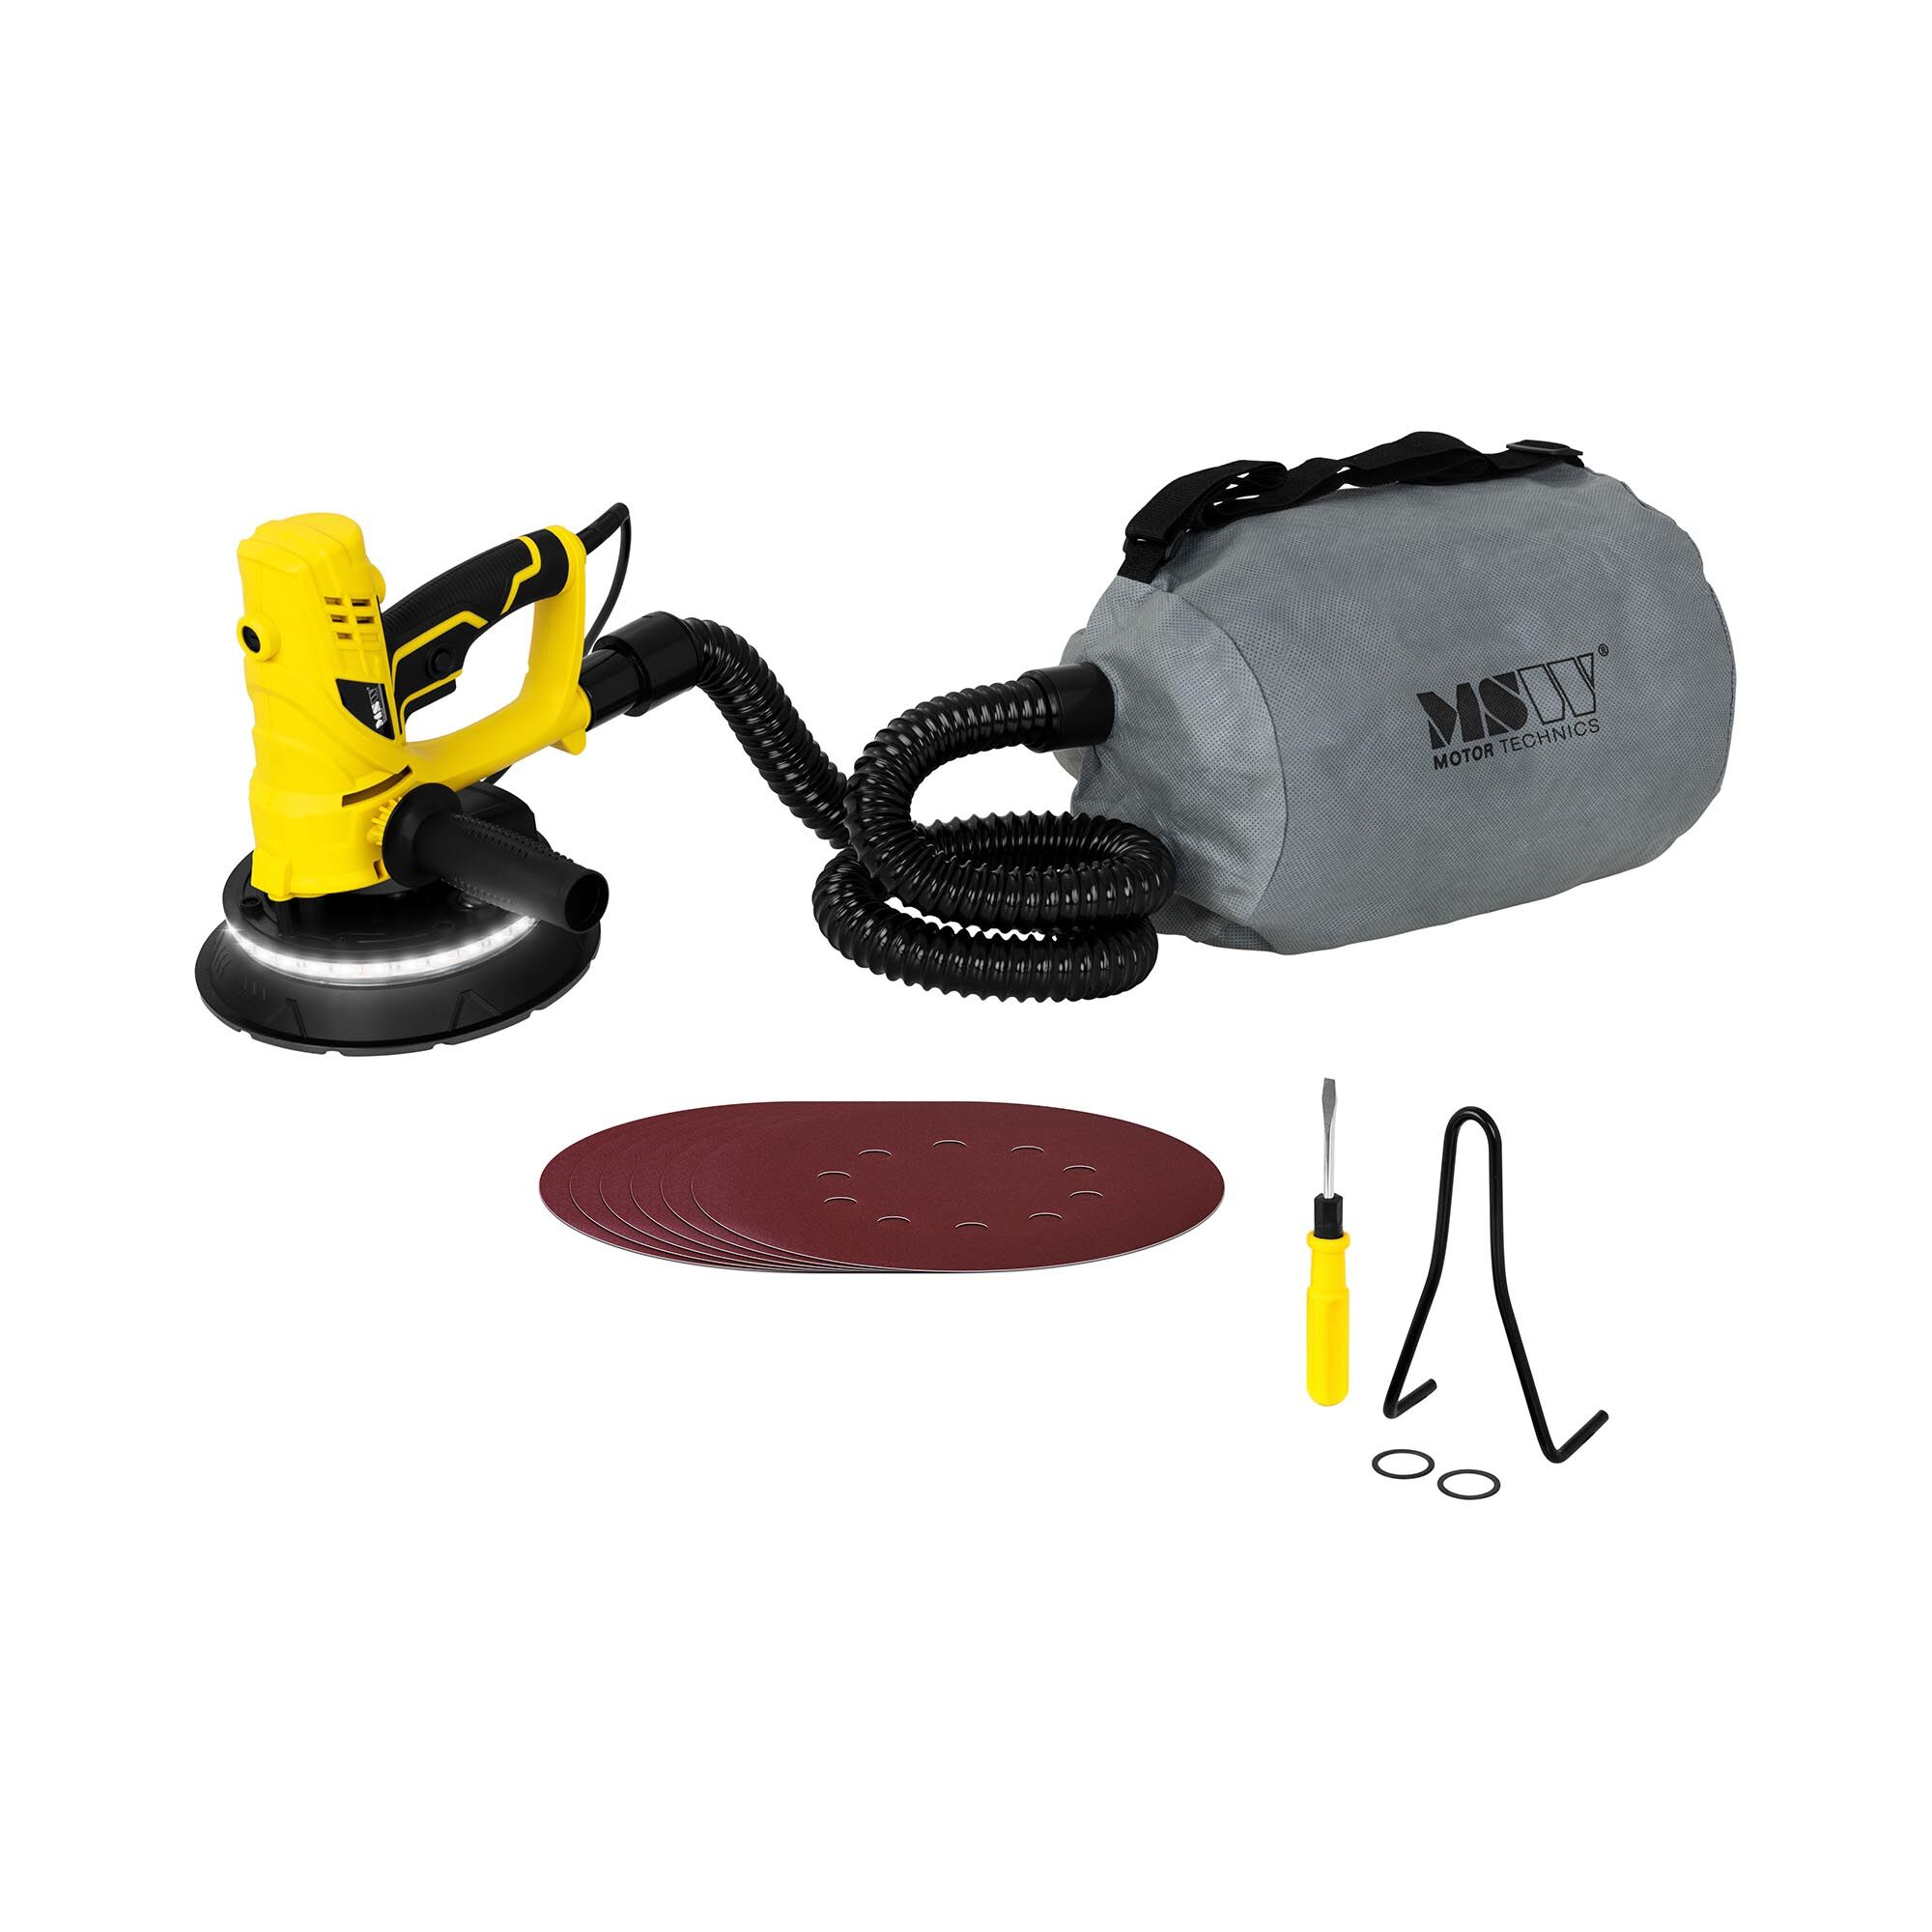 MSW Drywall Sander - 850 W - with LED light and dust bag MSW-DWS850WL